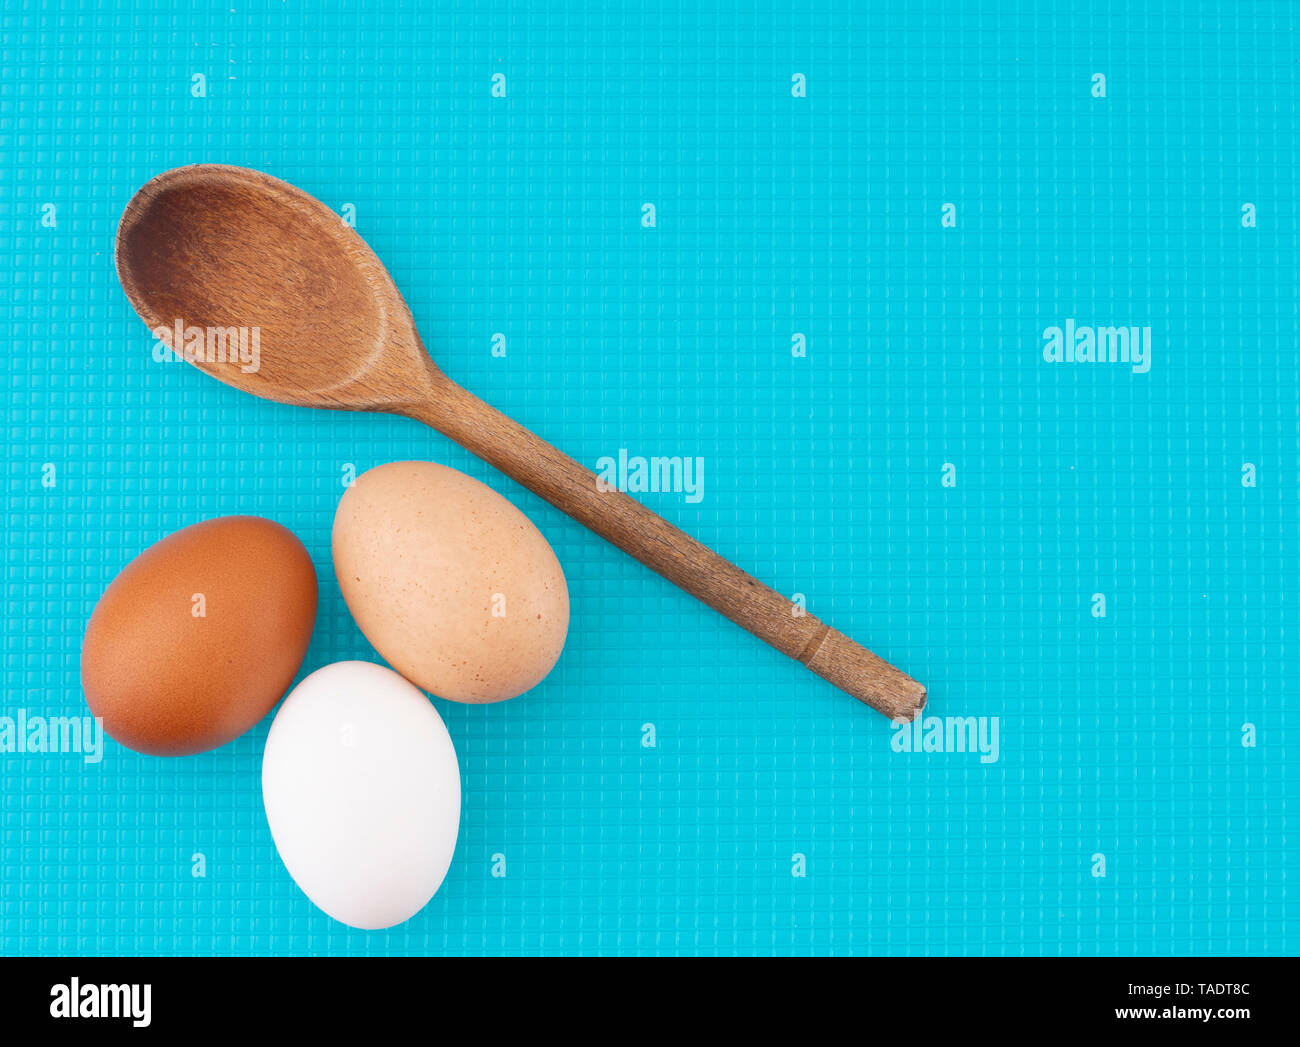 A diversity of eggs. Three chicken, hens eggs on turquoise kitchen board. Different colors: brown white and speckled. Stock Photo